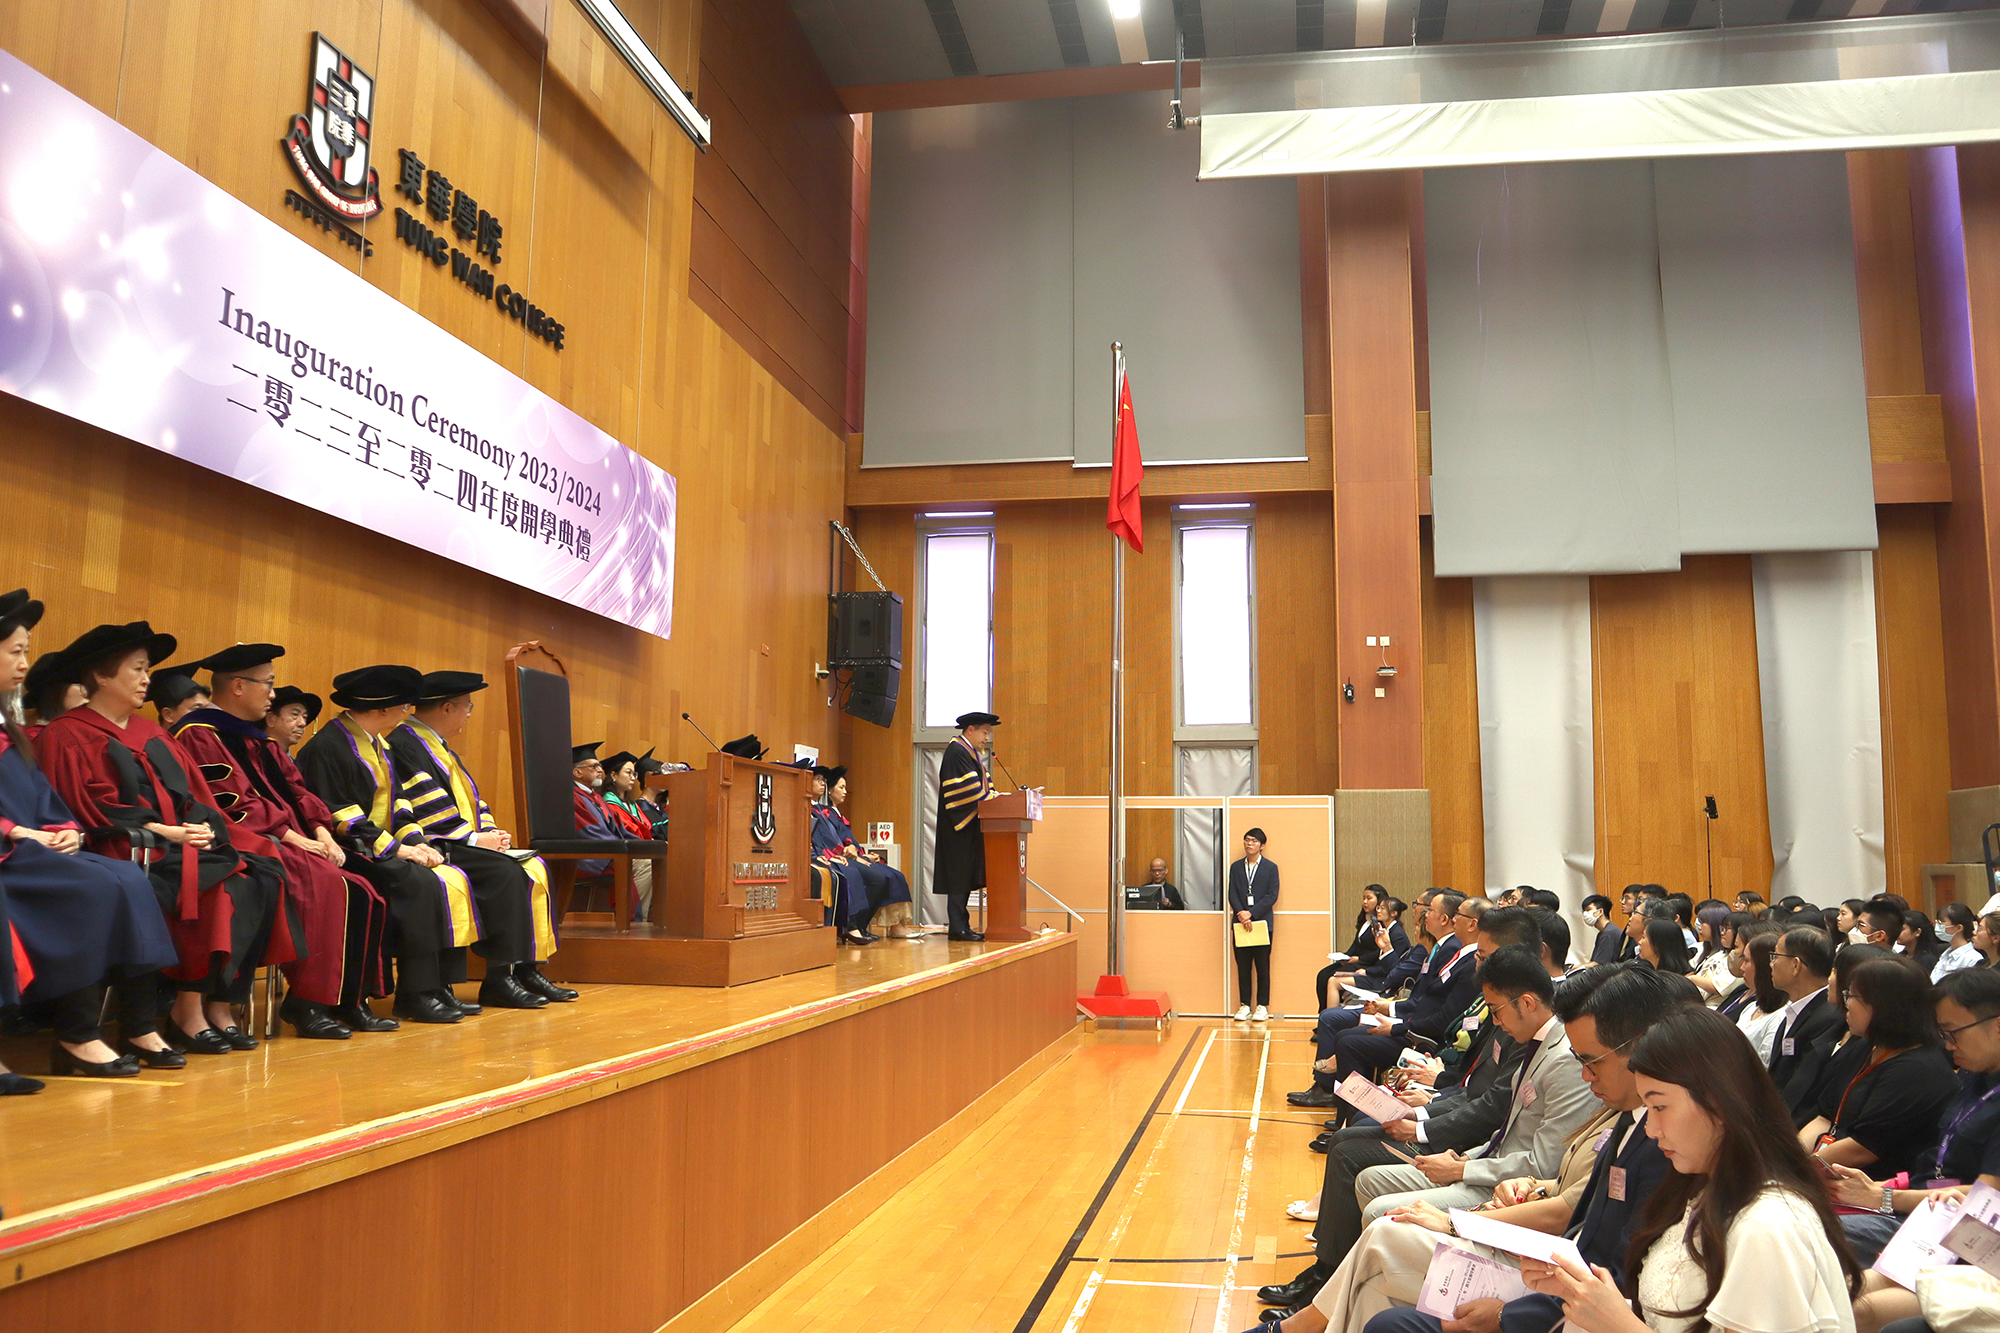 Tung Wah College Inauguration Ceremony 2023/2024